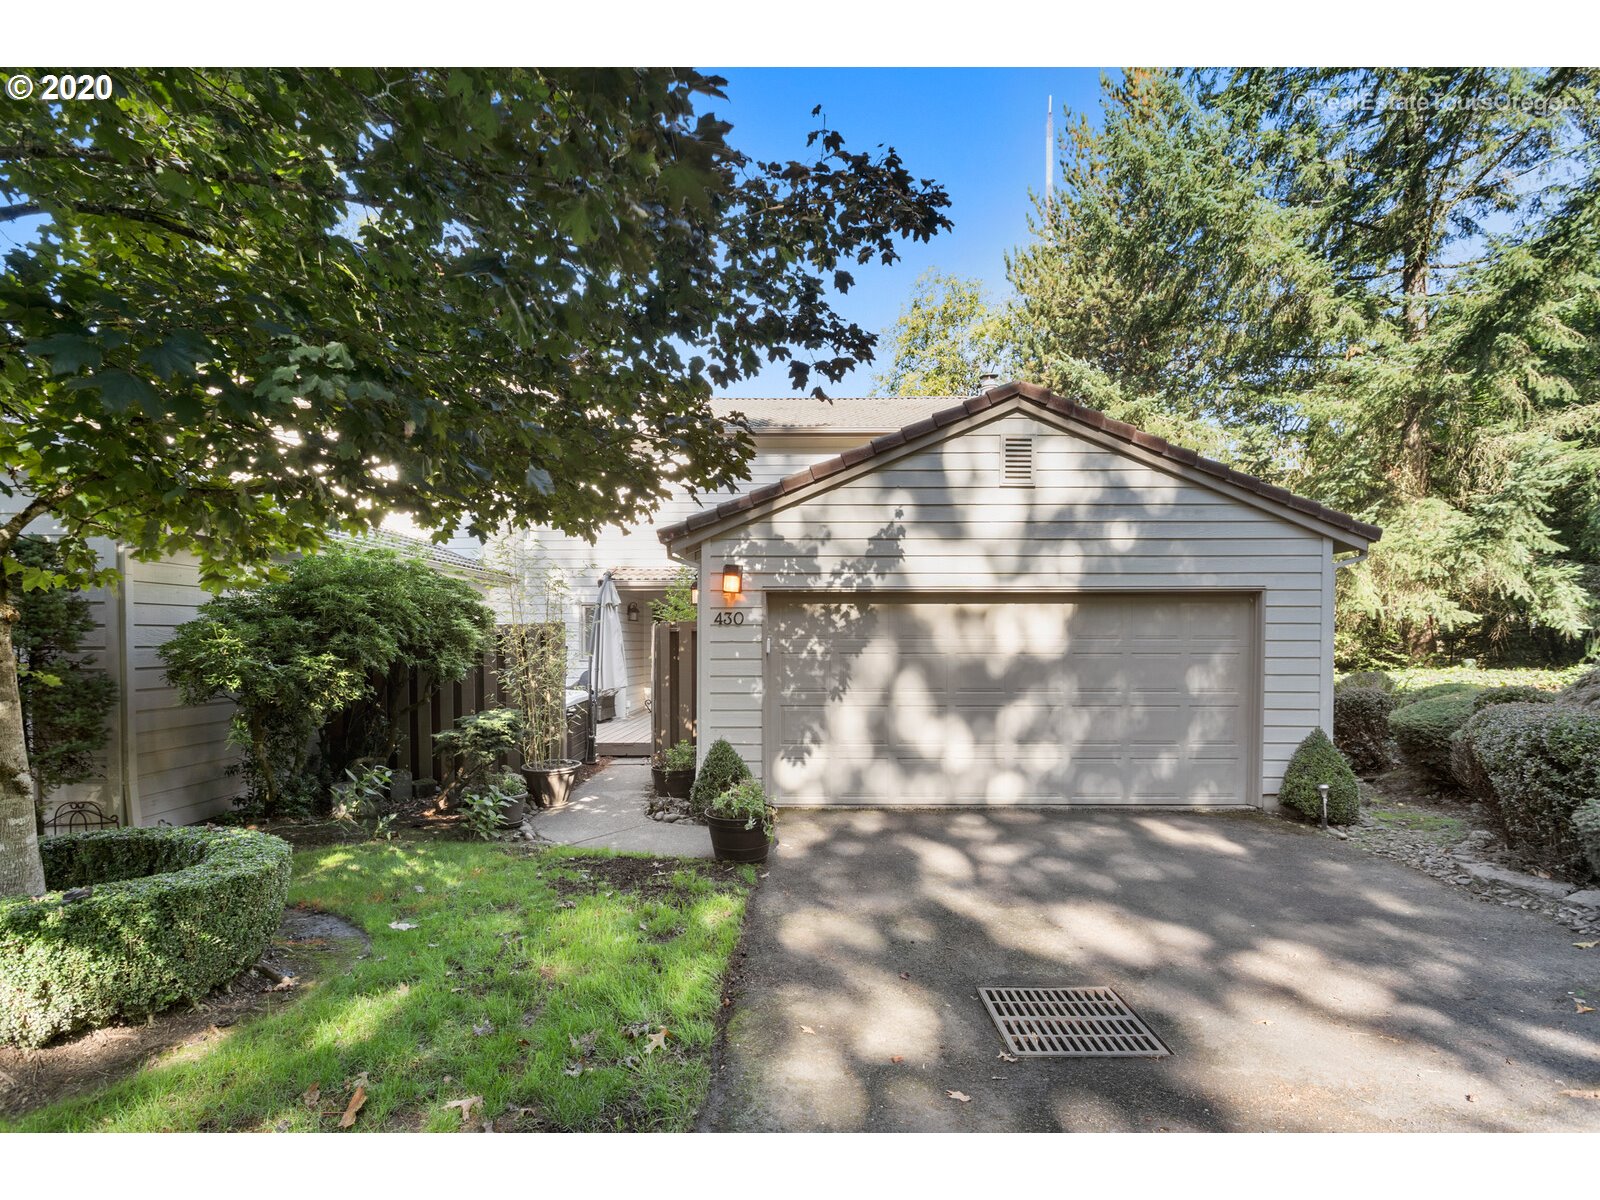 430 SW 70TH TER (1 of 32)